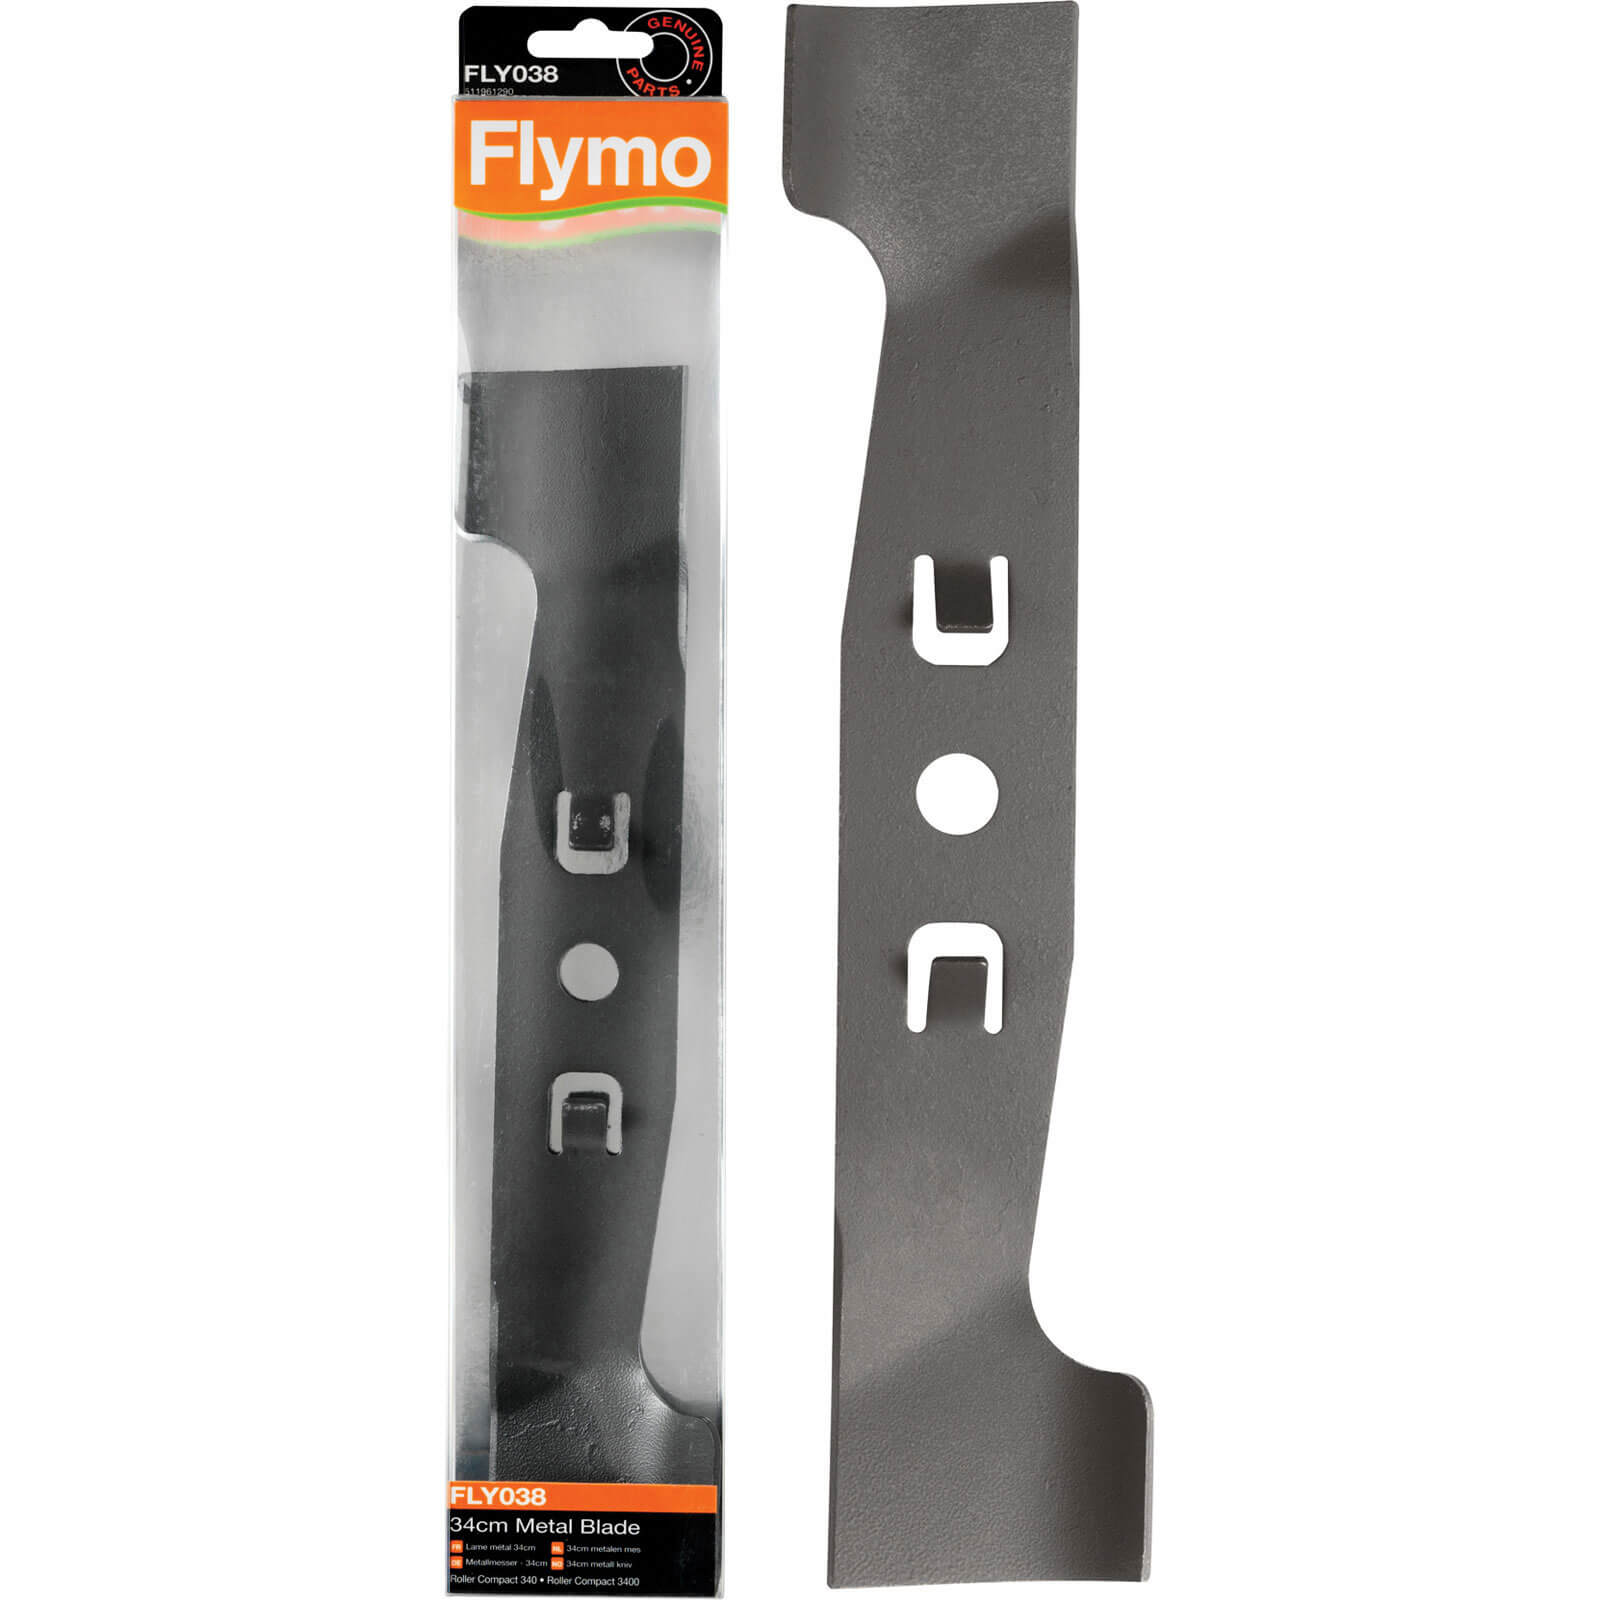 Image of Flymo FLY038 Genuine Blade for Roller Compact 340 Lawnmowers 340mm Pack of 1